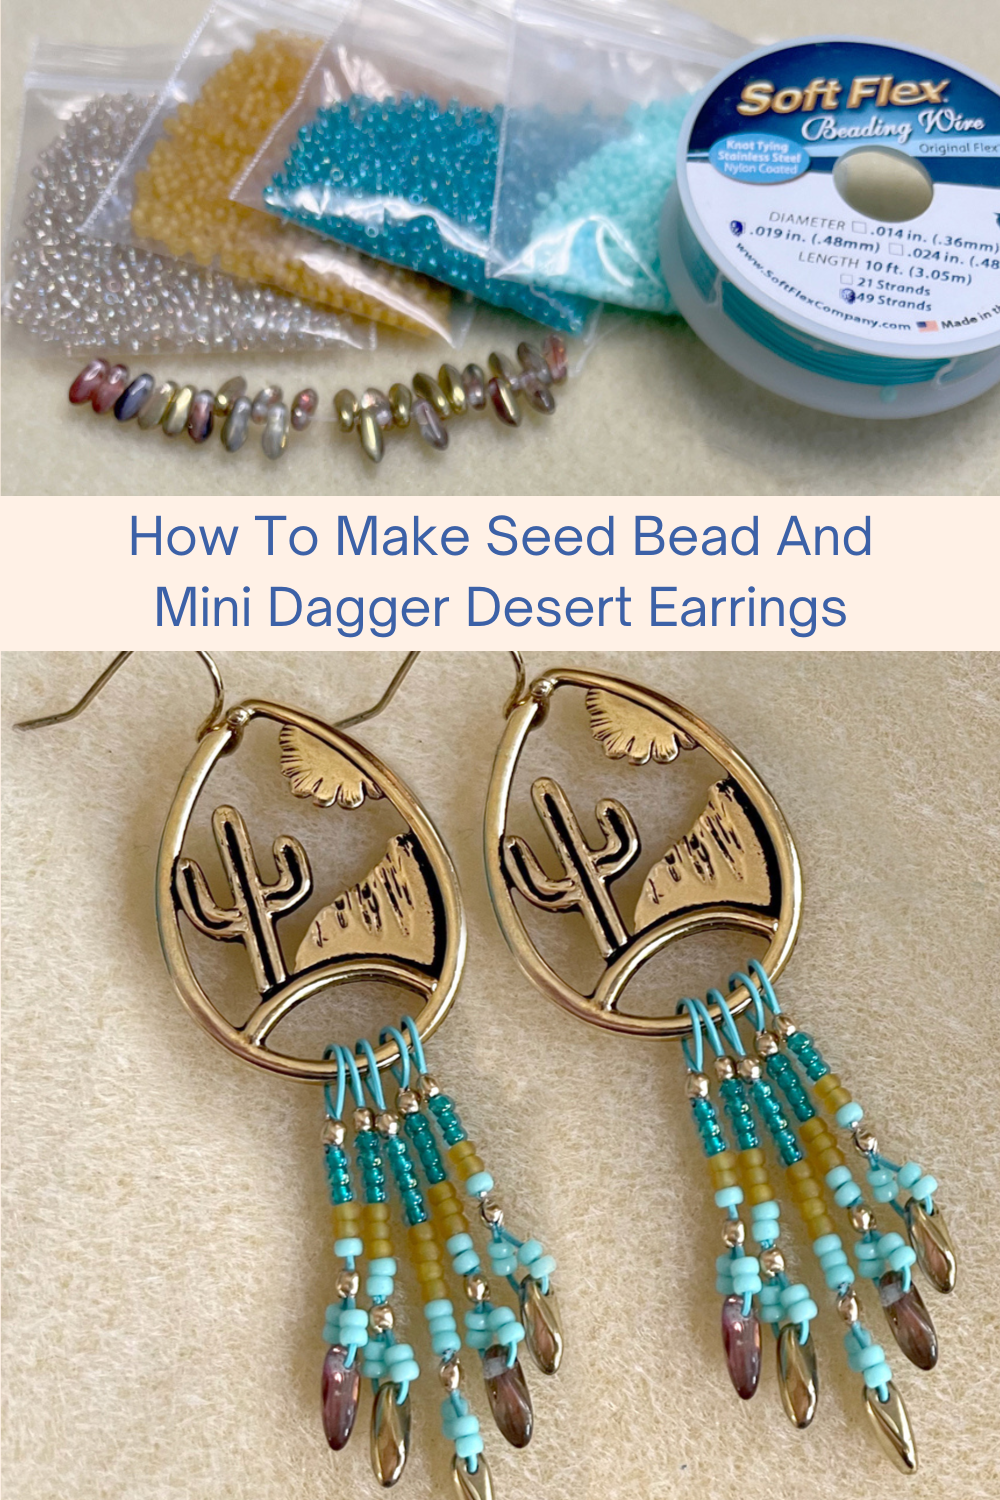 How To Make Seed Bead And Mini Dagger Desert Earrings Collage